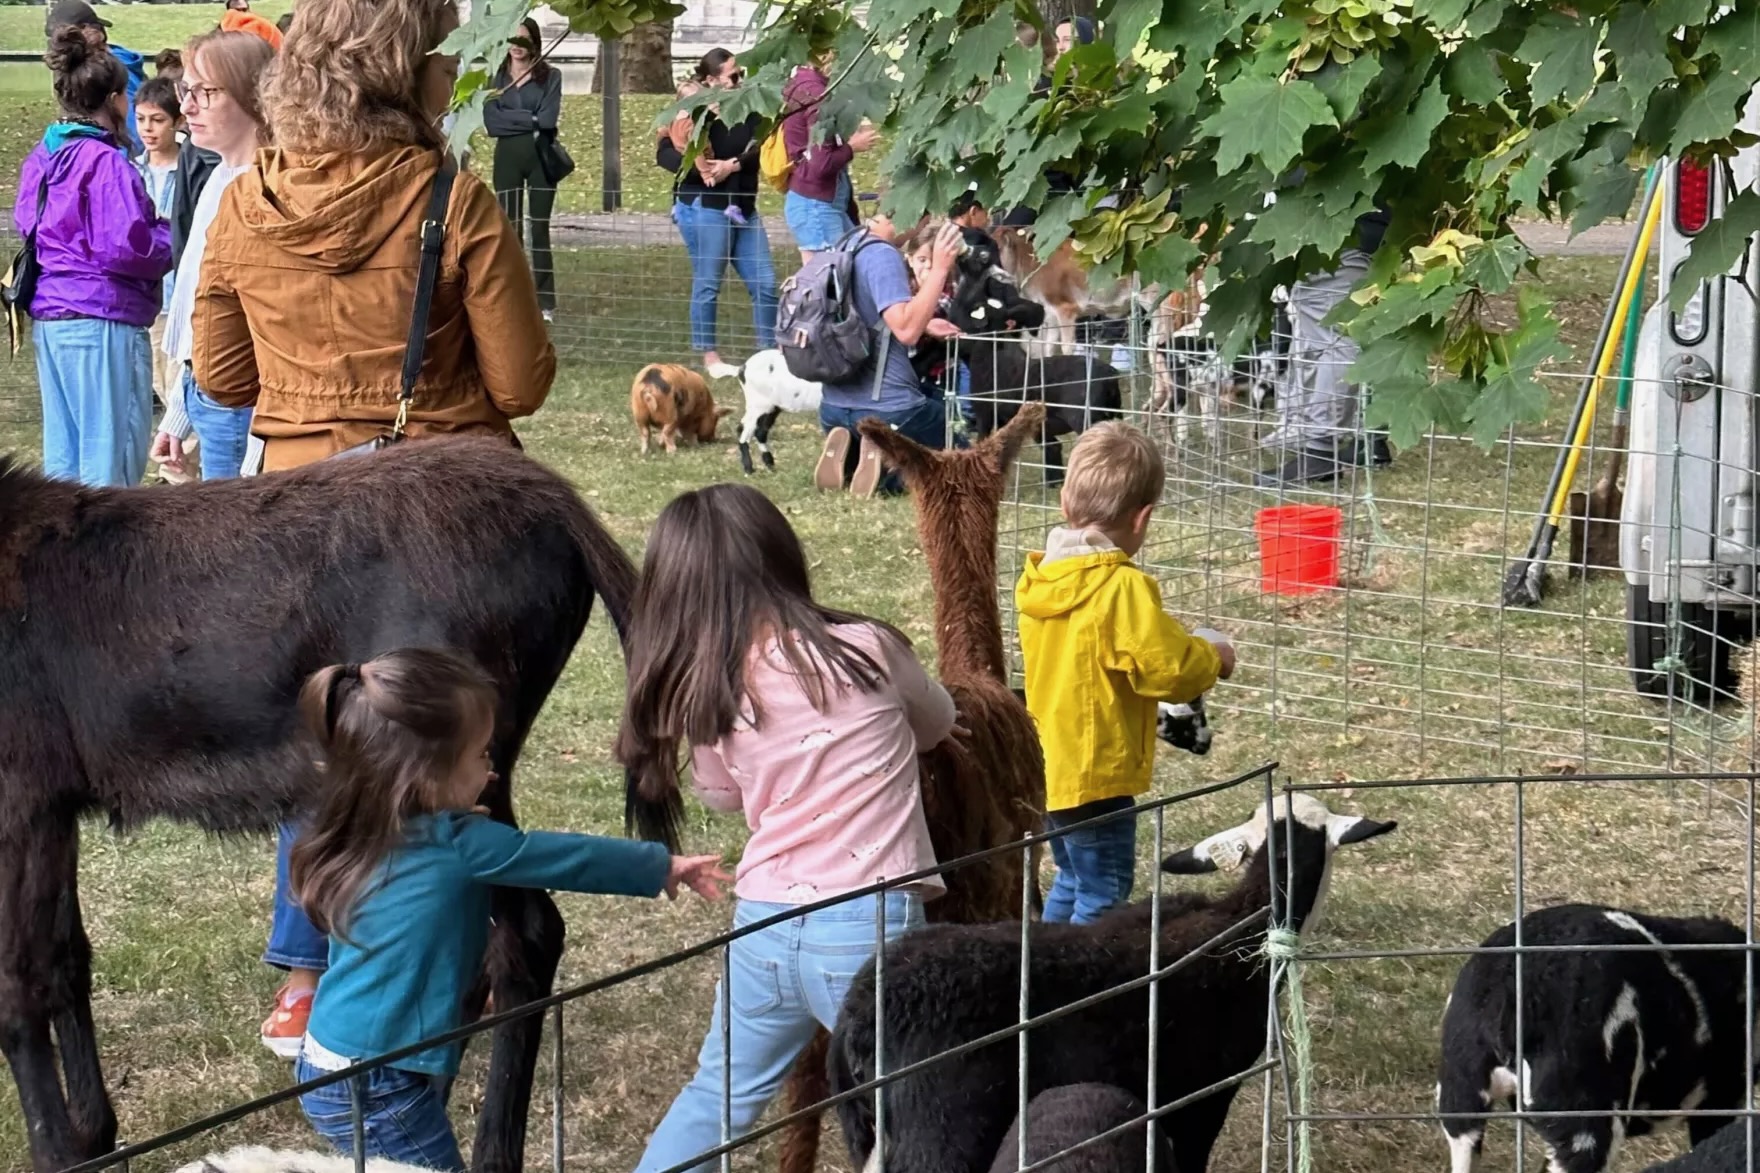 Kids at a petting zoo with calves